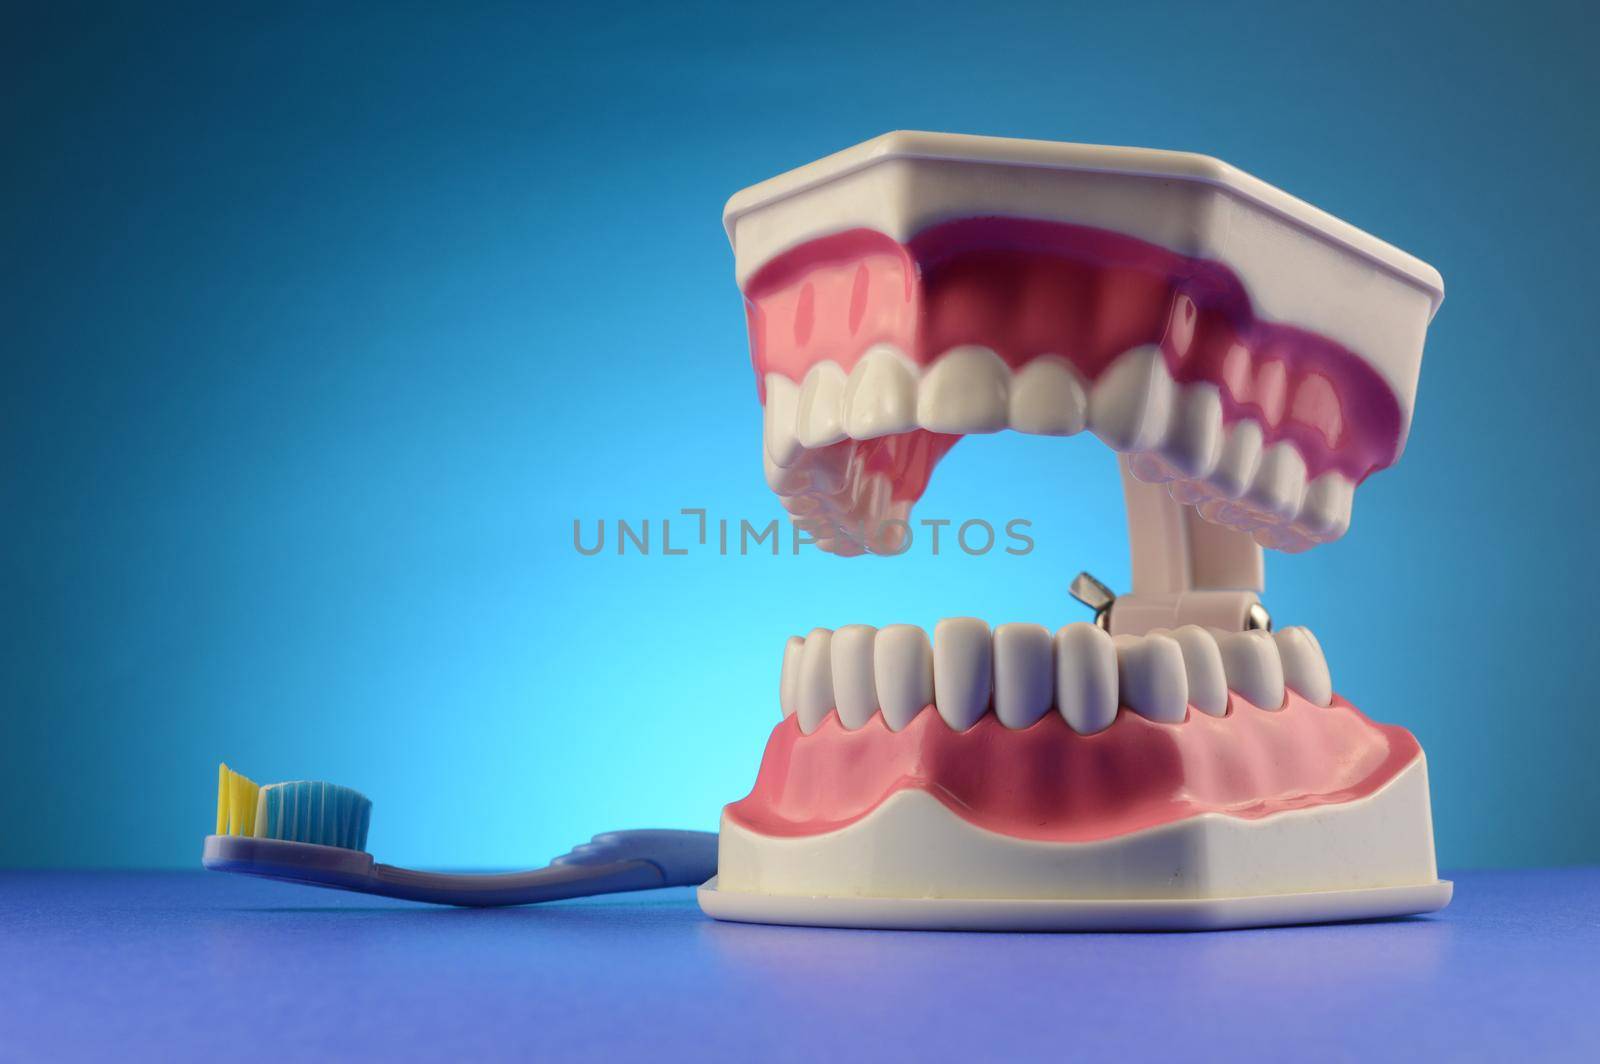 A display of dental teeth and a toothbrush over blue for dentist purposes.